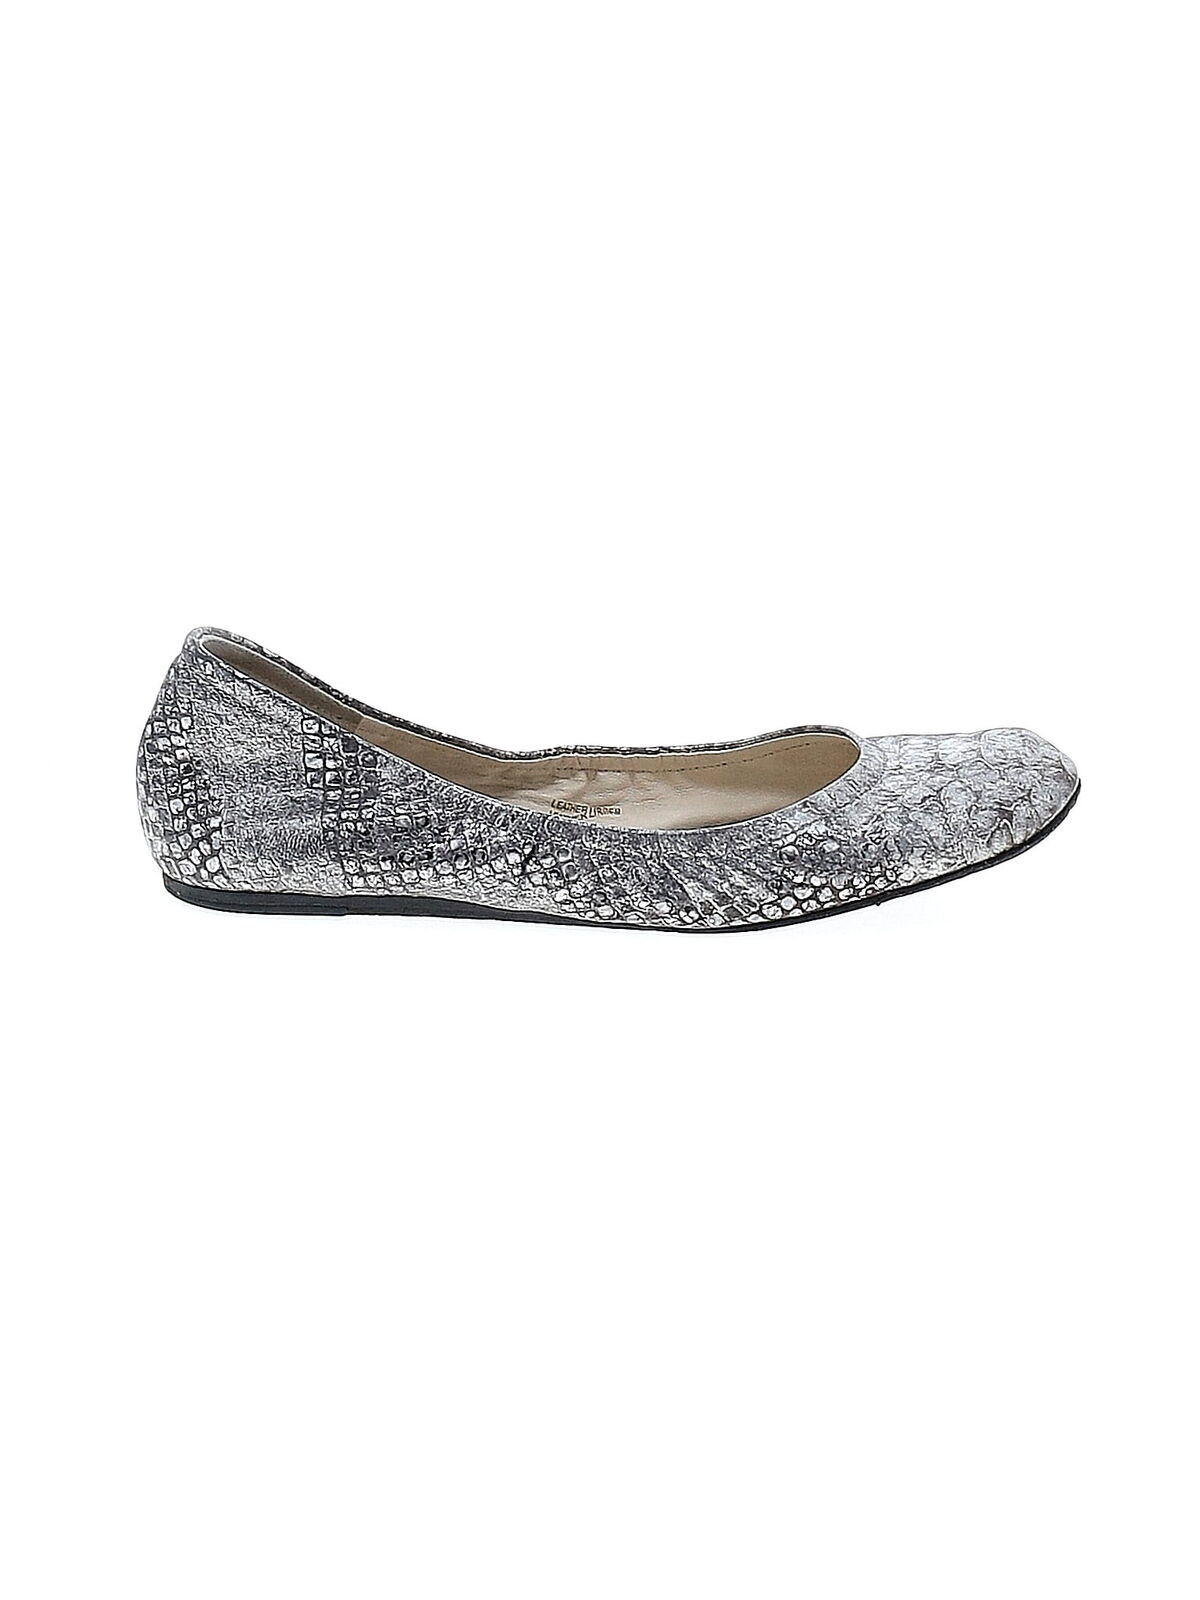 Lavender Label by Vera Wang Women Silver Flats 5.5 - image 1